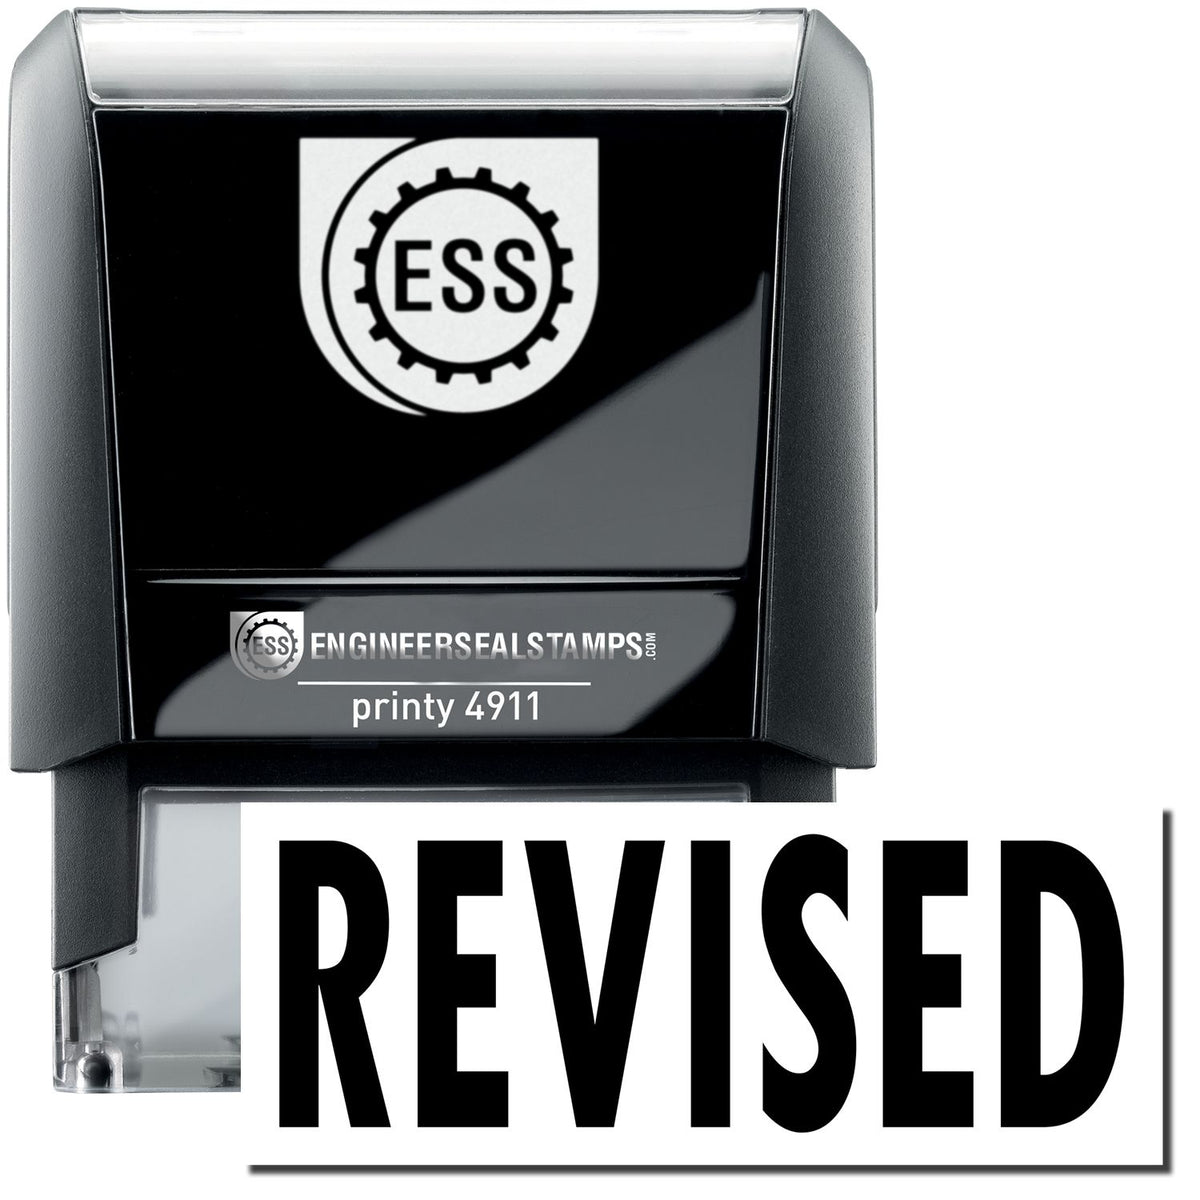 A self-inking stamp with a stamped image showing how the text &quot;REVISED&quot; in bold font is displayed after stamping.